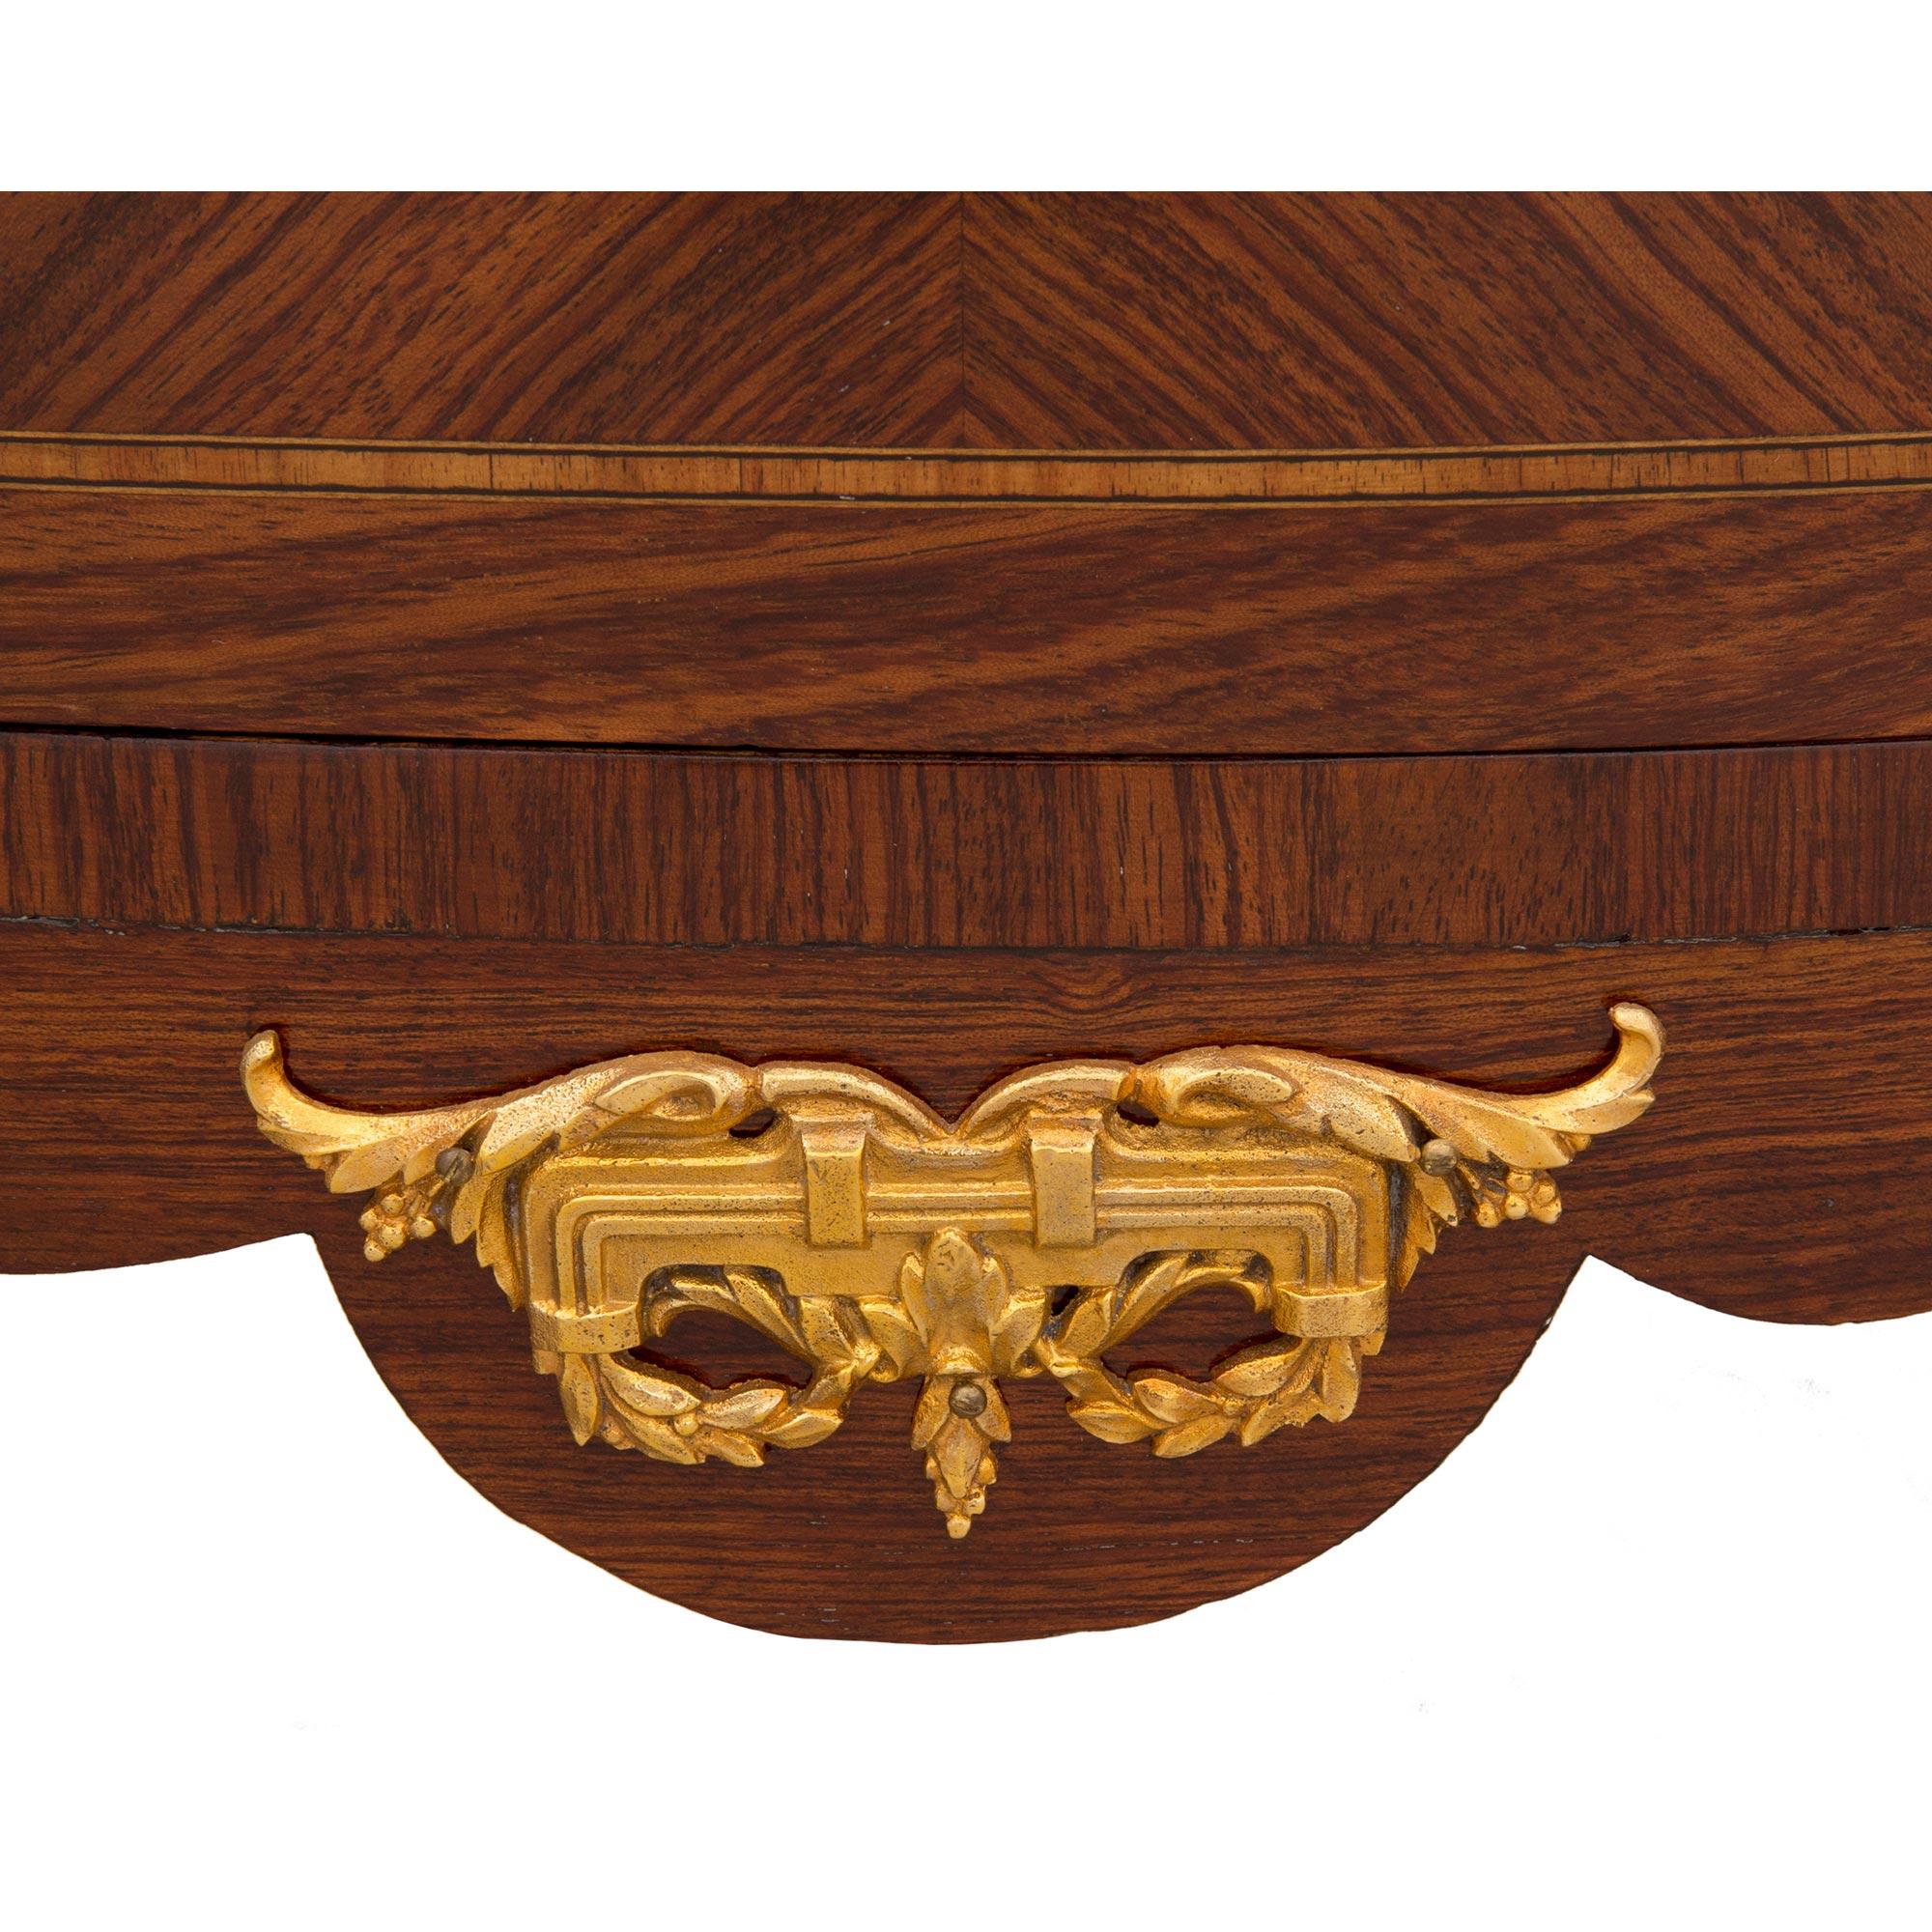 French 19th Century Transitional Style Kingwood, Boxwood and Ormolu Side Table For Sale 5